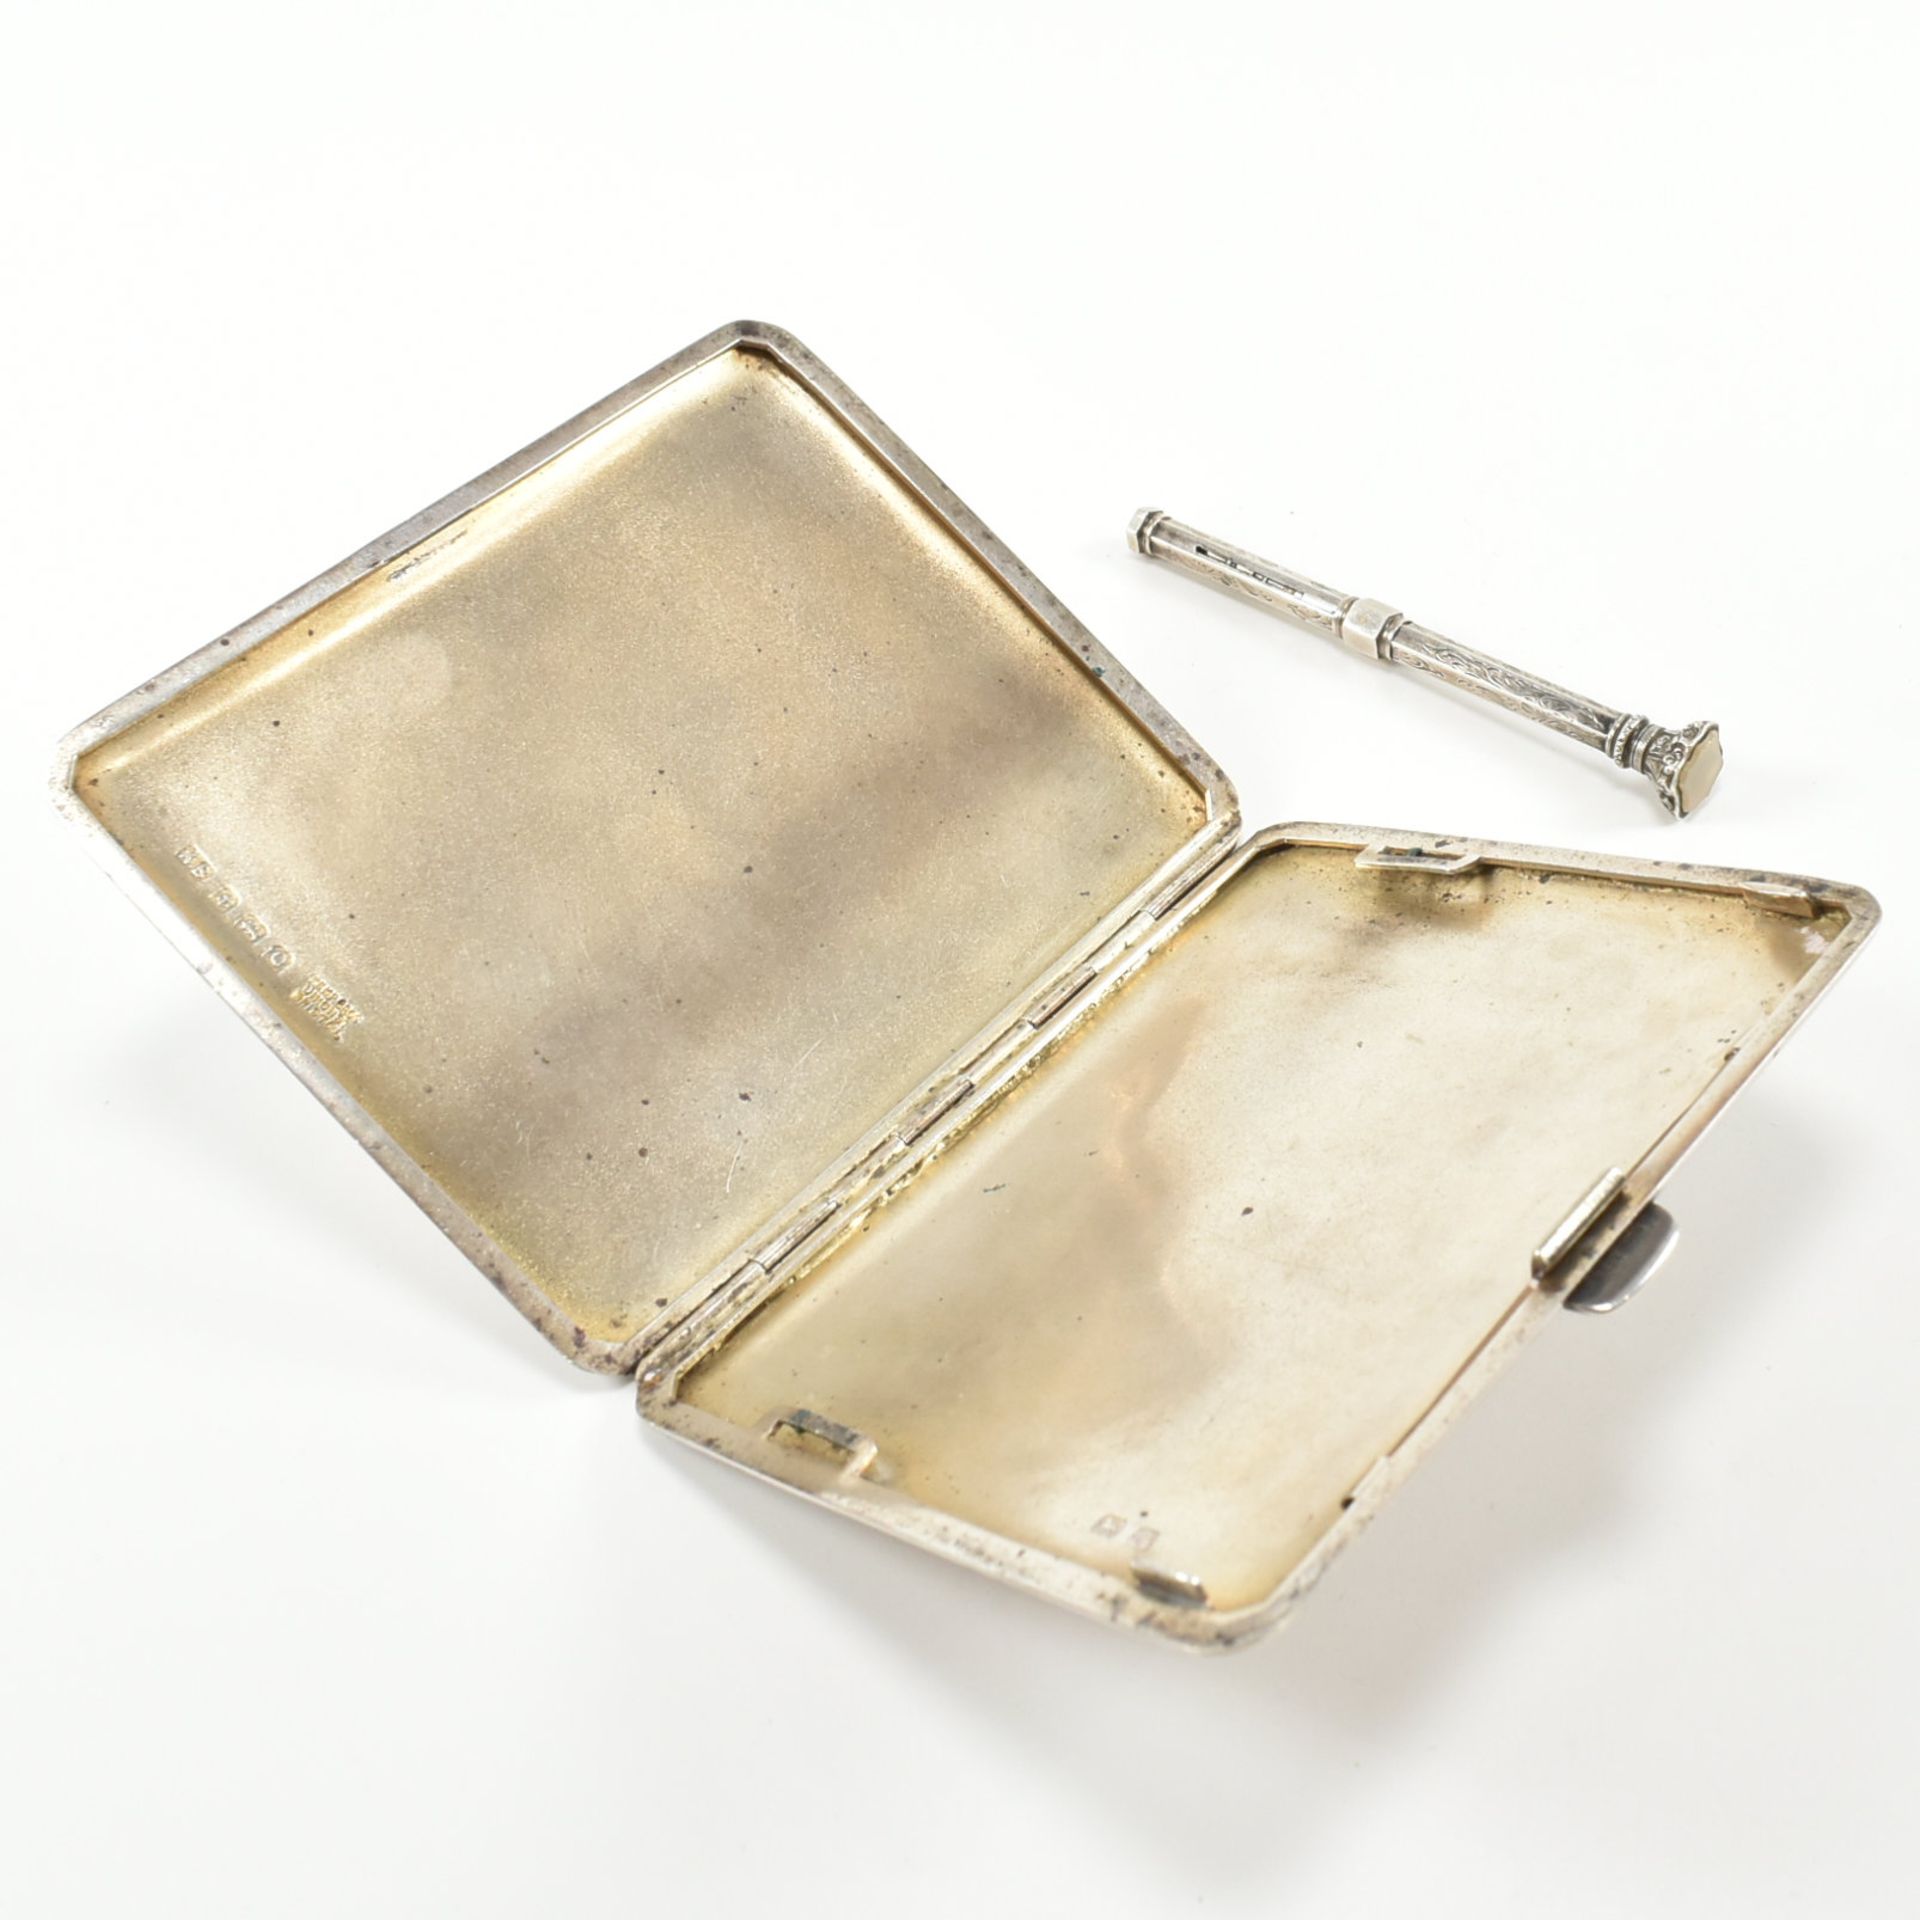 STERLING SILVER CIGARETTE CASE & A SILVER PROPELLING PENCIL - Image 6 of 8